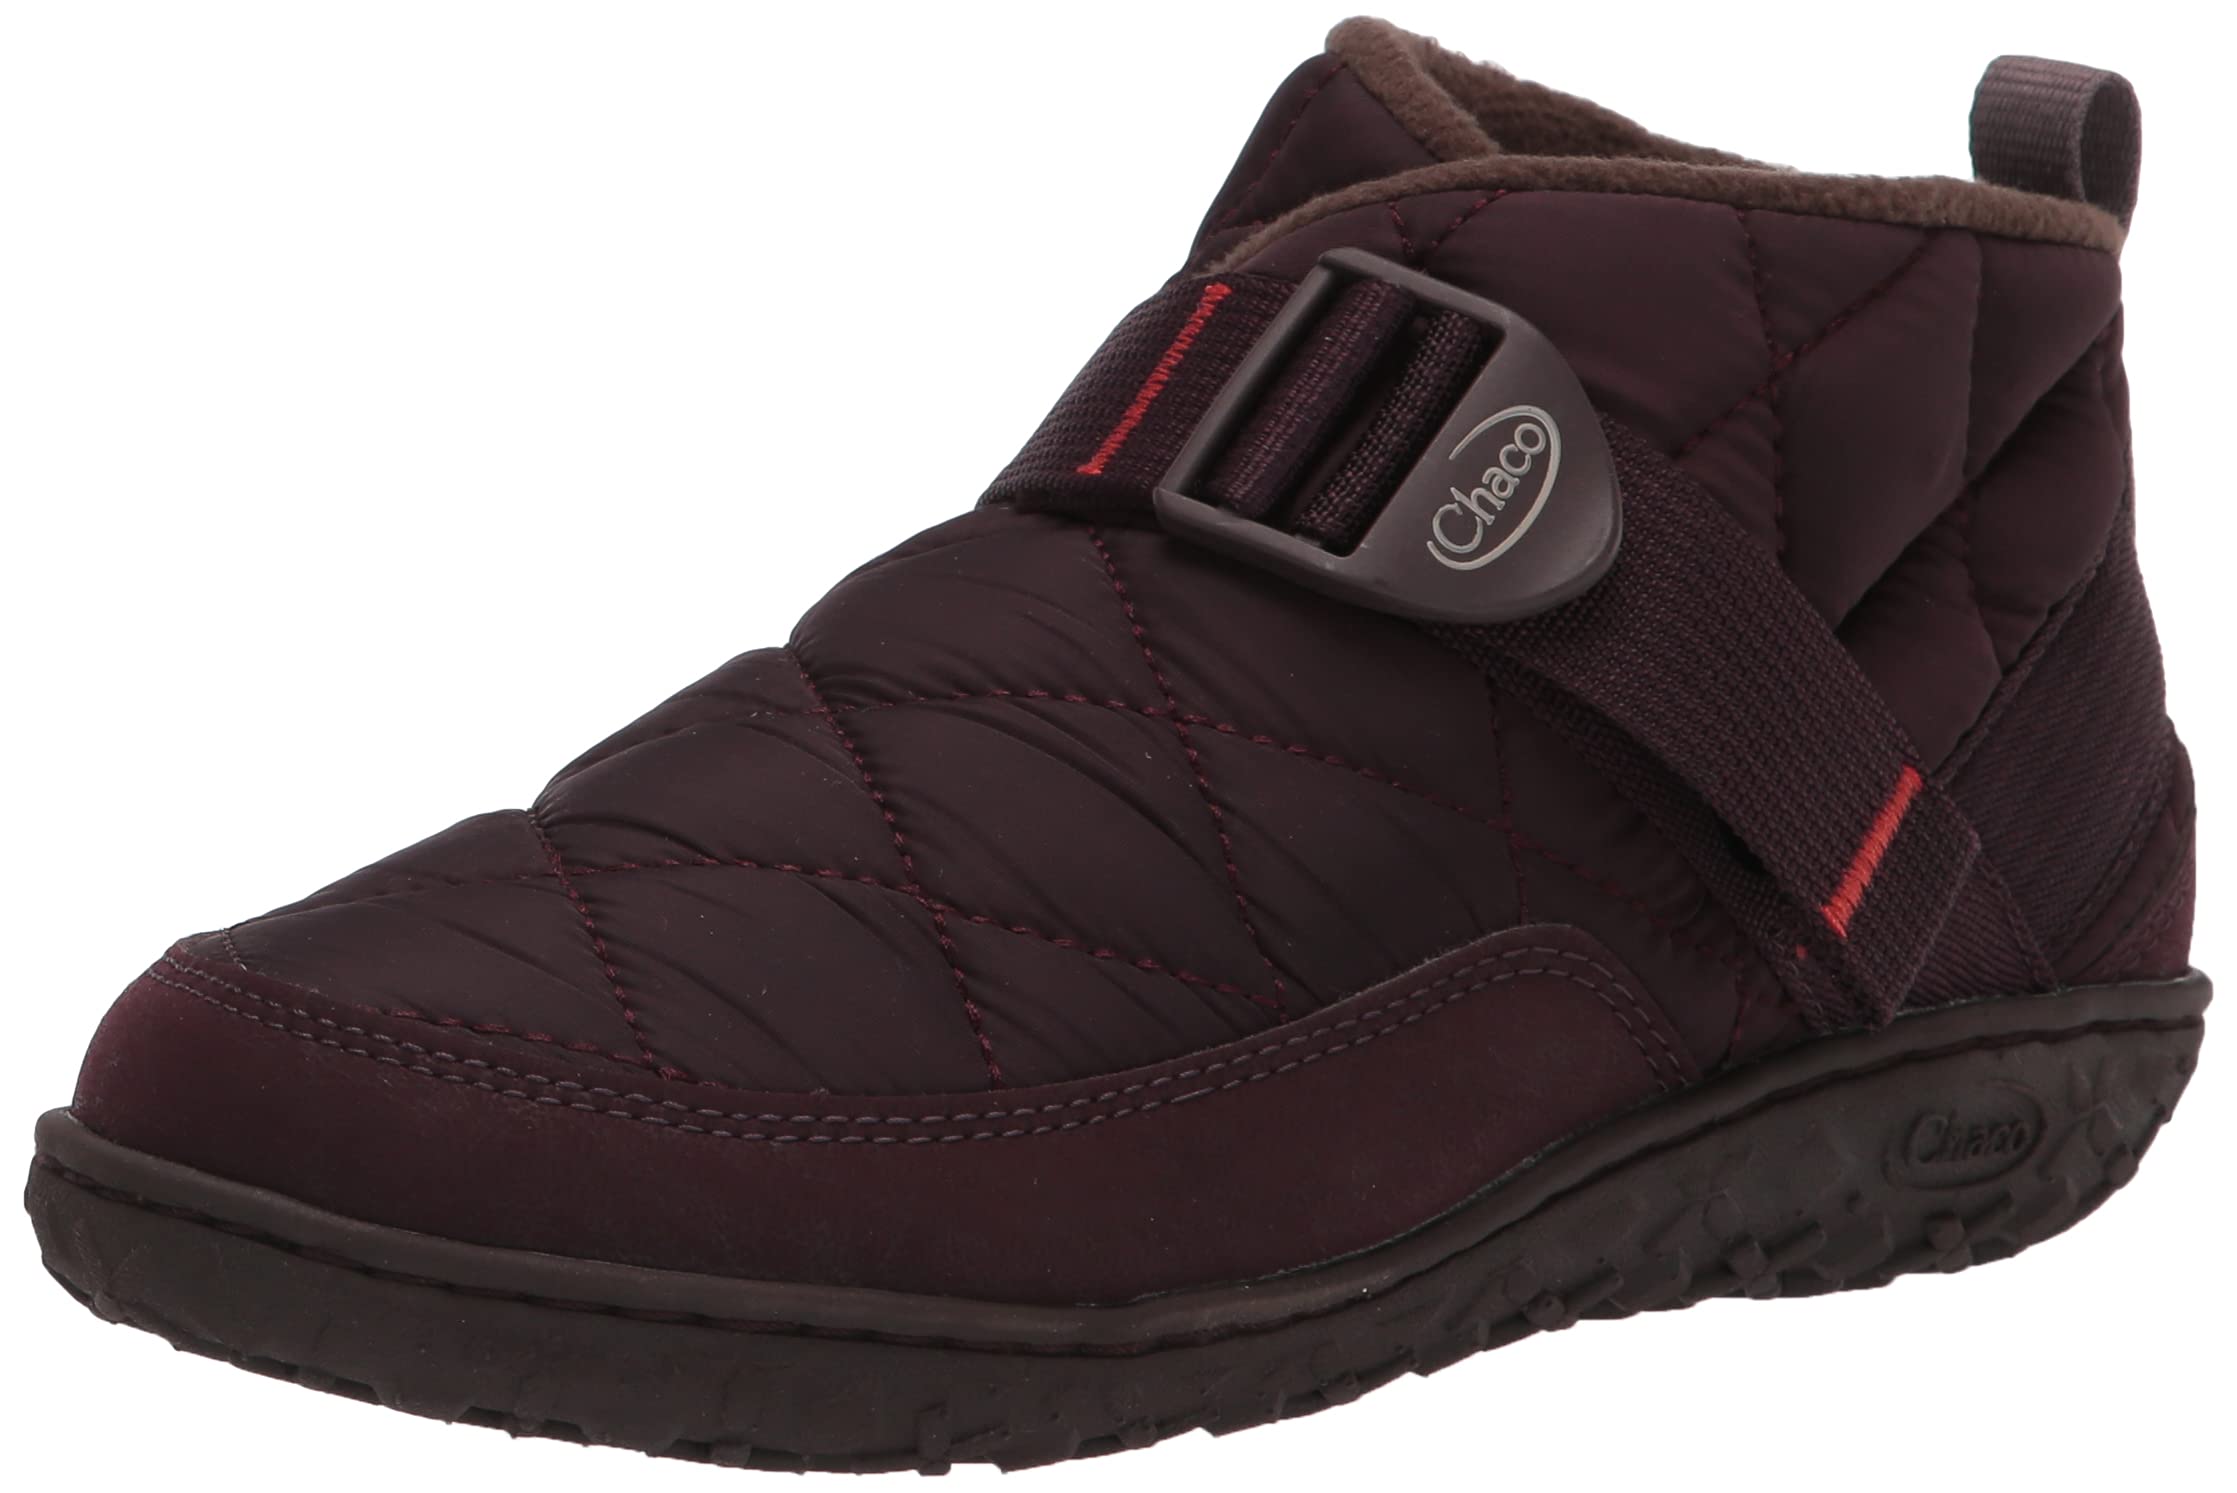 Chaco Women's Ramble Puff Ankle Boot